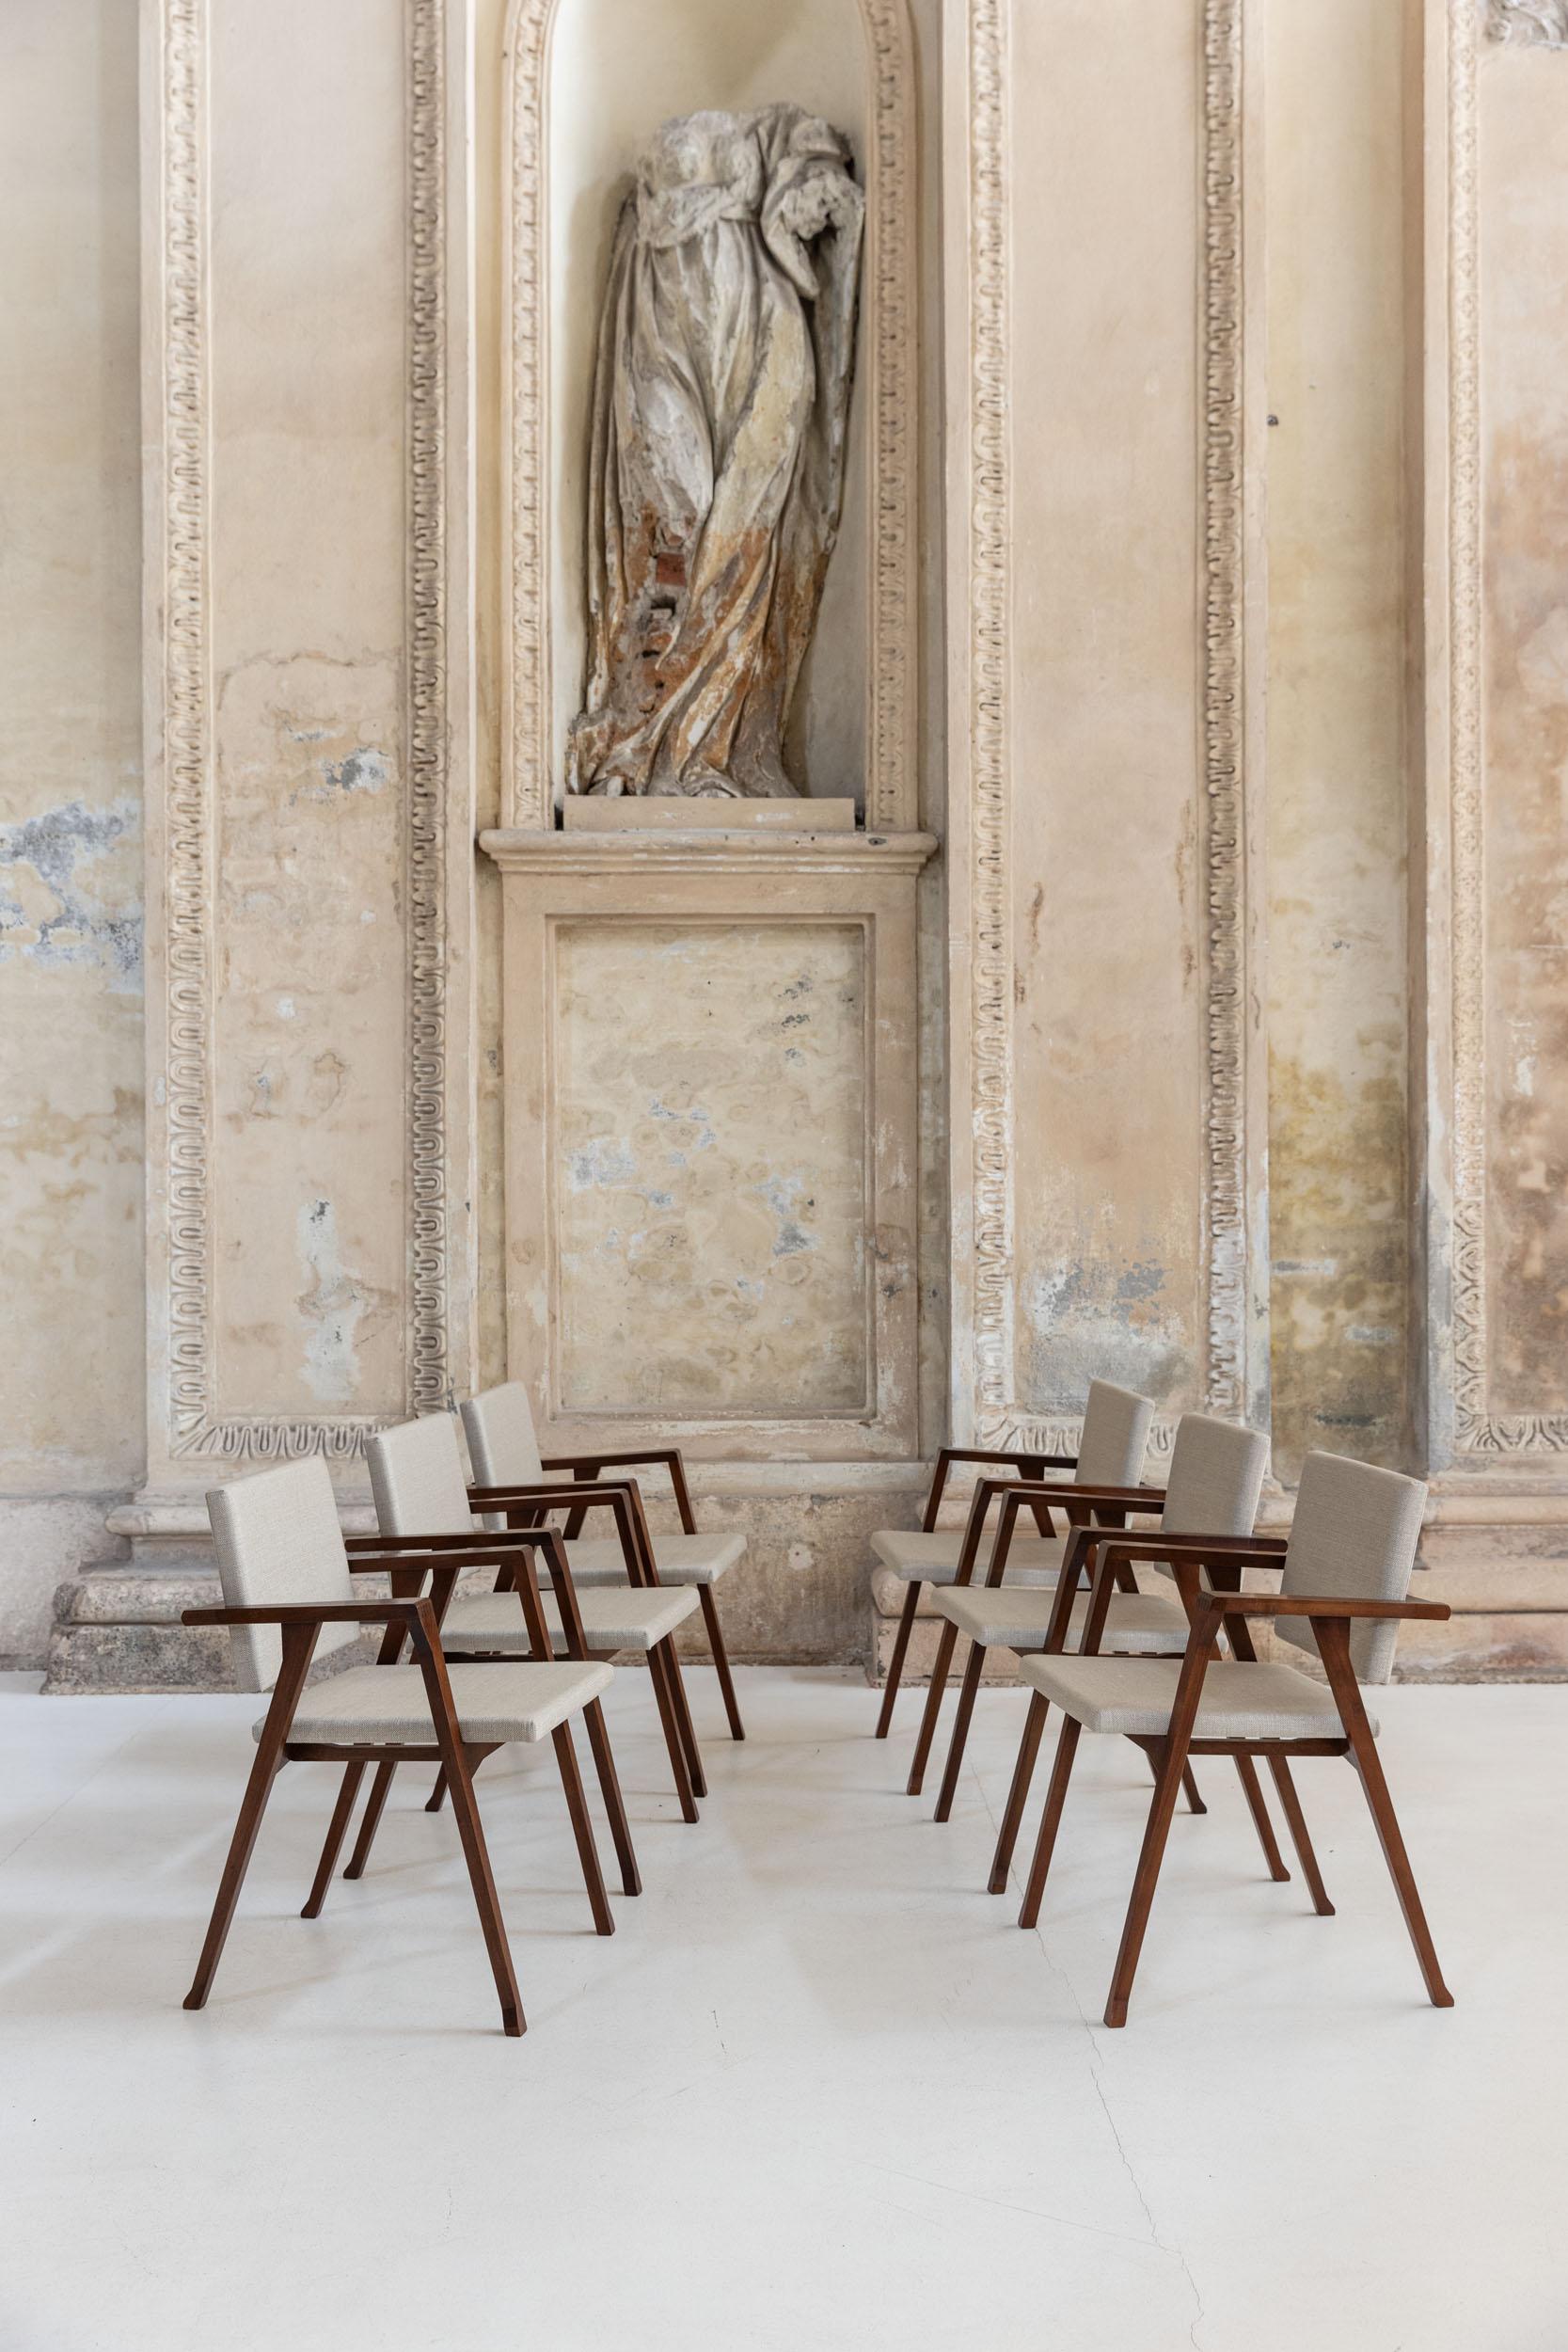 Set of six Luisa chairs with a wooden structure reupholstered in beige fabric, designed by Franco Albini and manufactured by Poggi Pavia, c. 1950. 
Luisa chair won the Compasso d'oro ADI in 1955.
Bib: Franco Albini. Metodo e Poesia, edizioni I libri